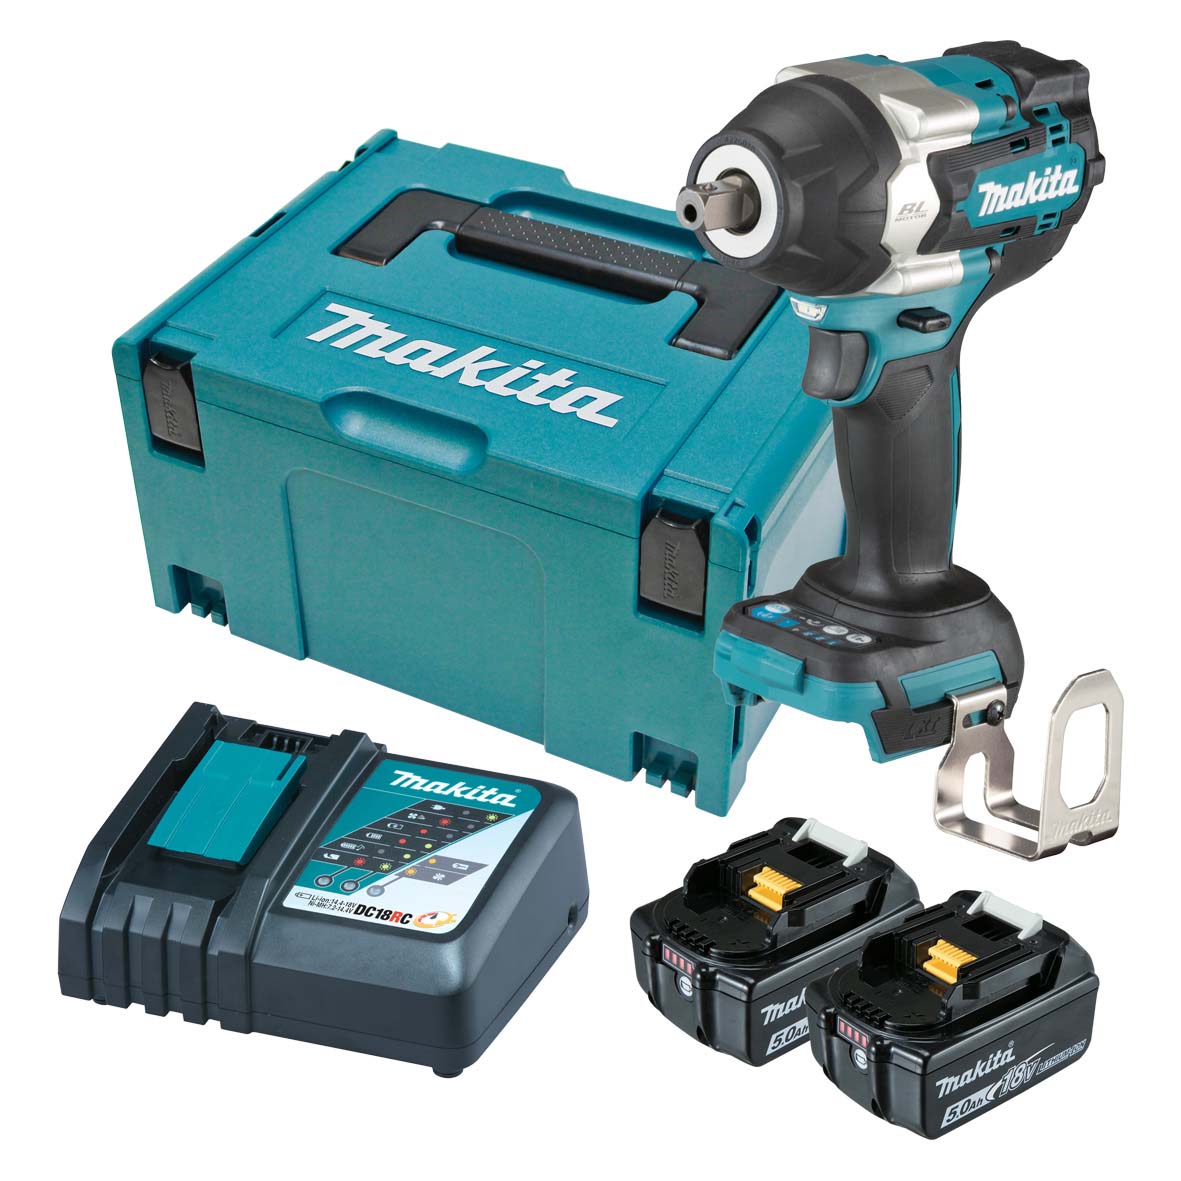 18V 1/2" Brushless Detent Pin Impact Wrench Kit DTW701RTJ by Makita